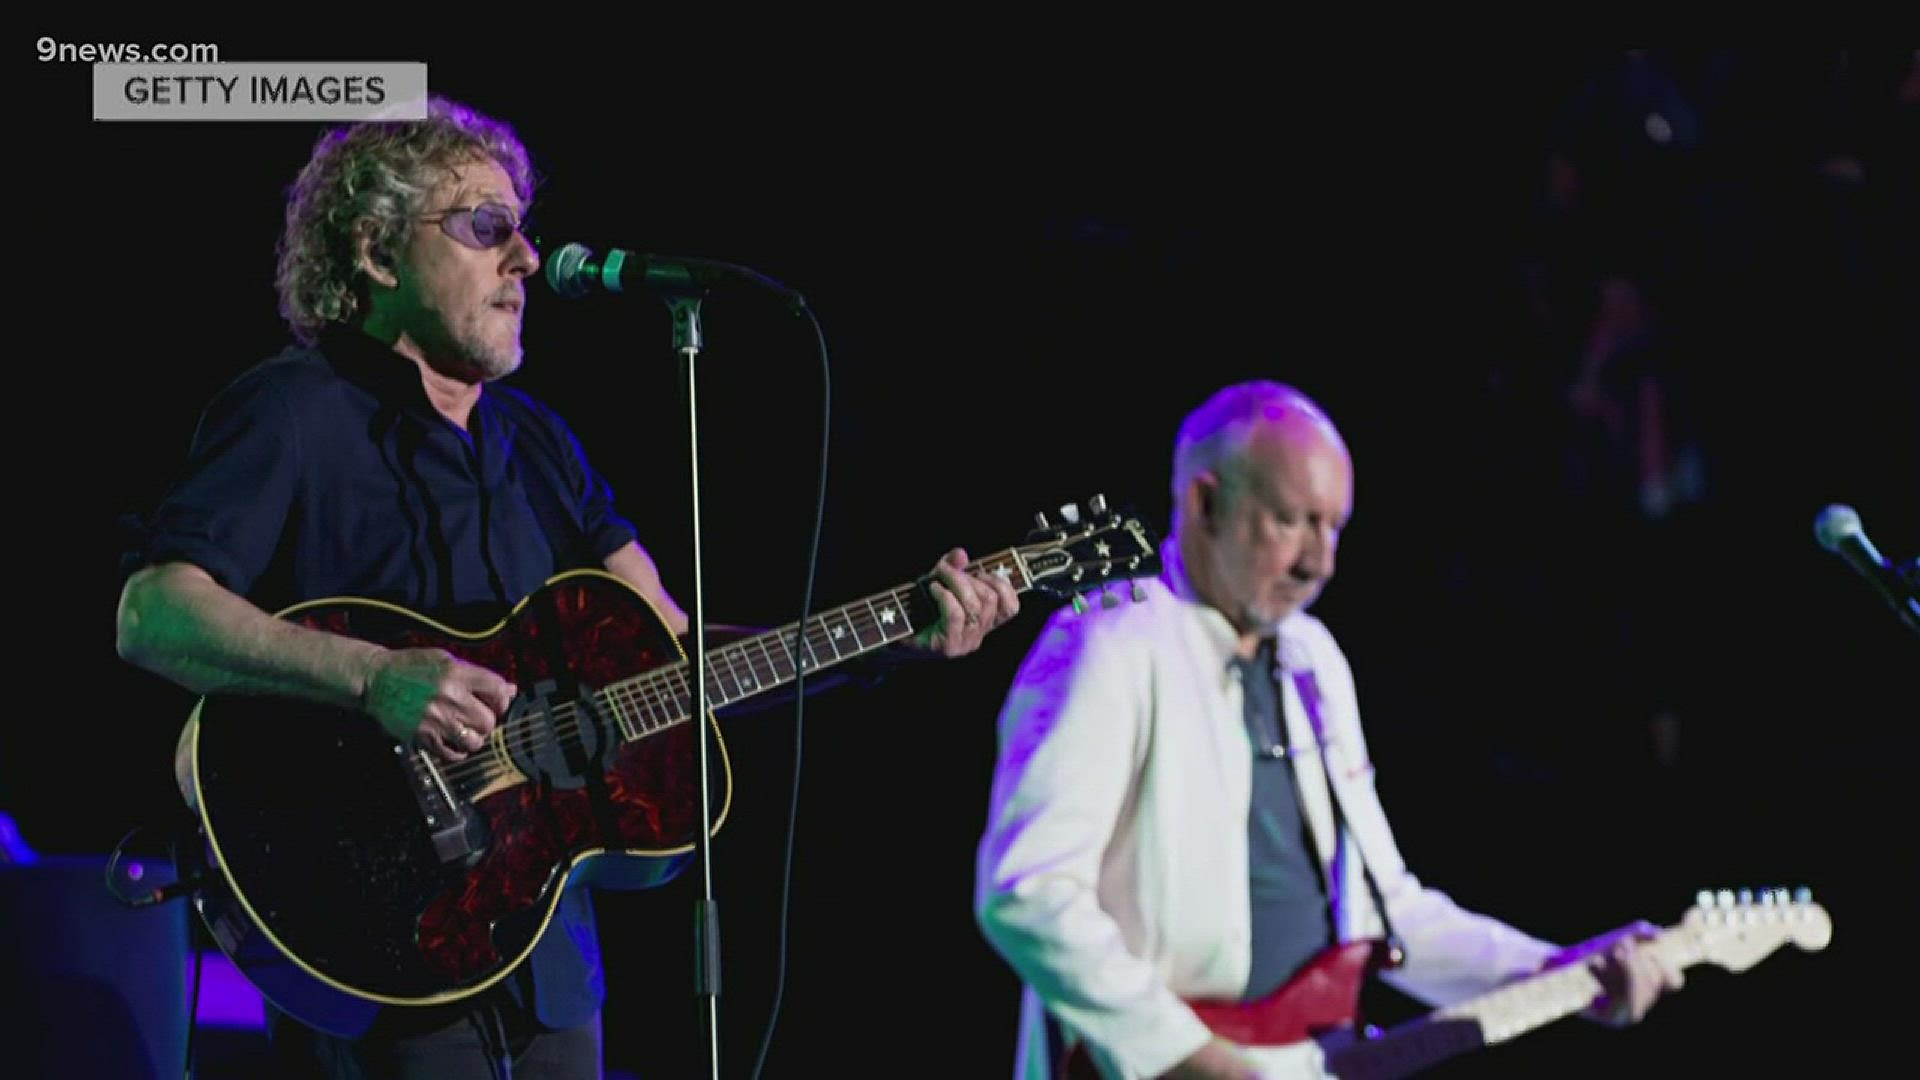 British rock legends The Who will bring their "Moving On!" Tour to Denver in September 2019.